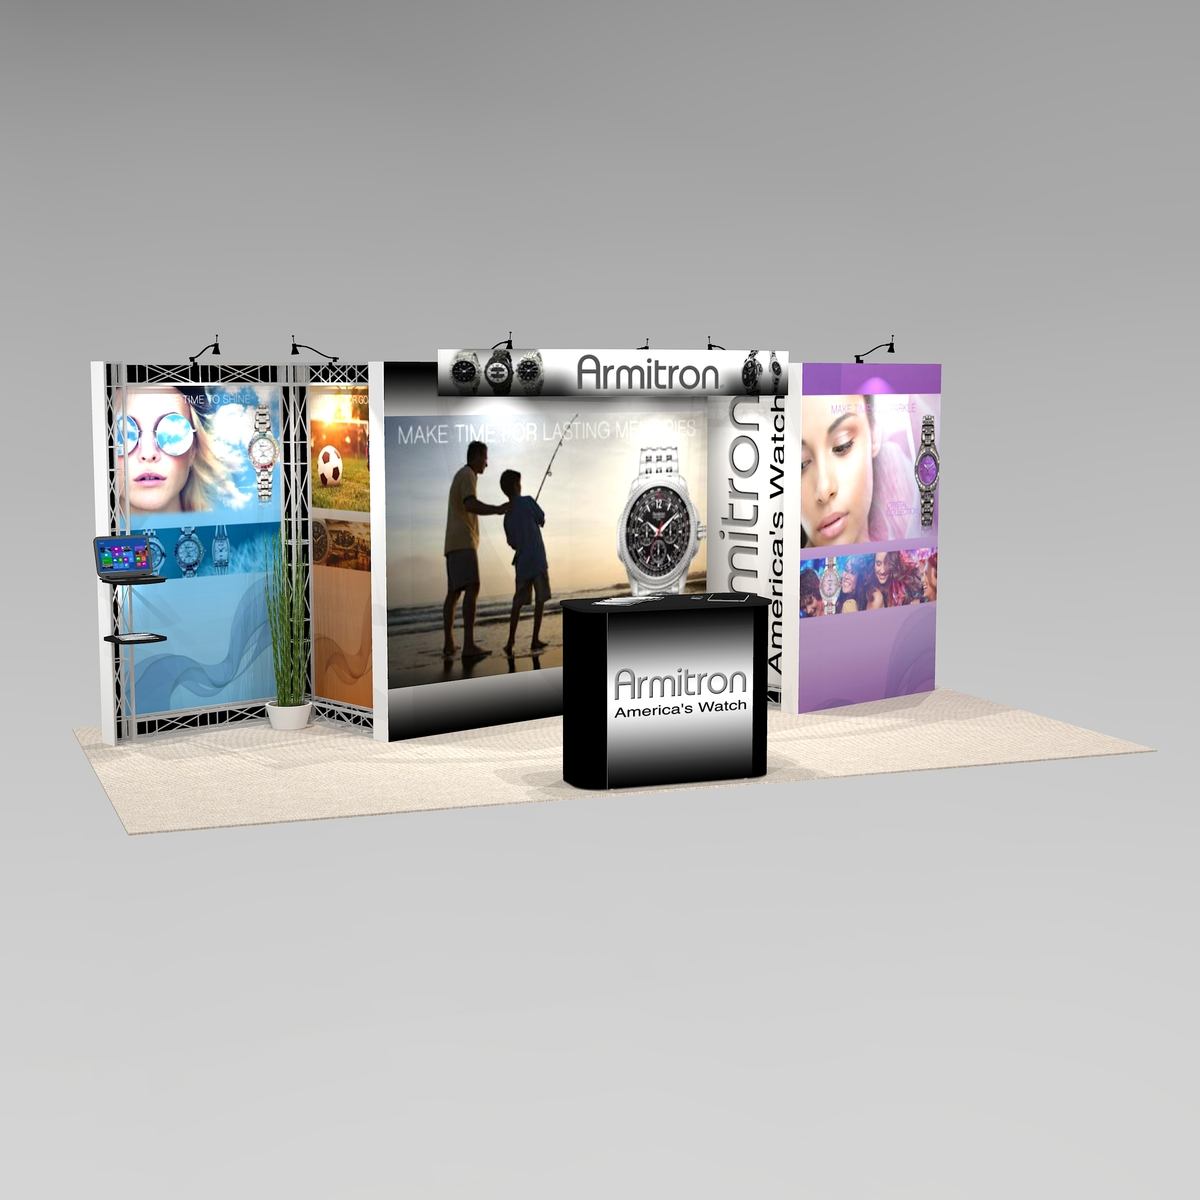 Customizable for Product trade show exhibit design DIA1020 Graphic Package C